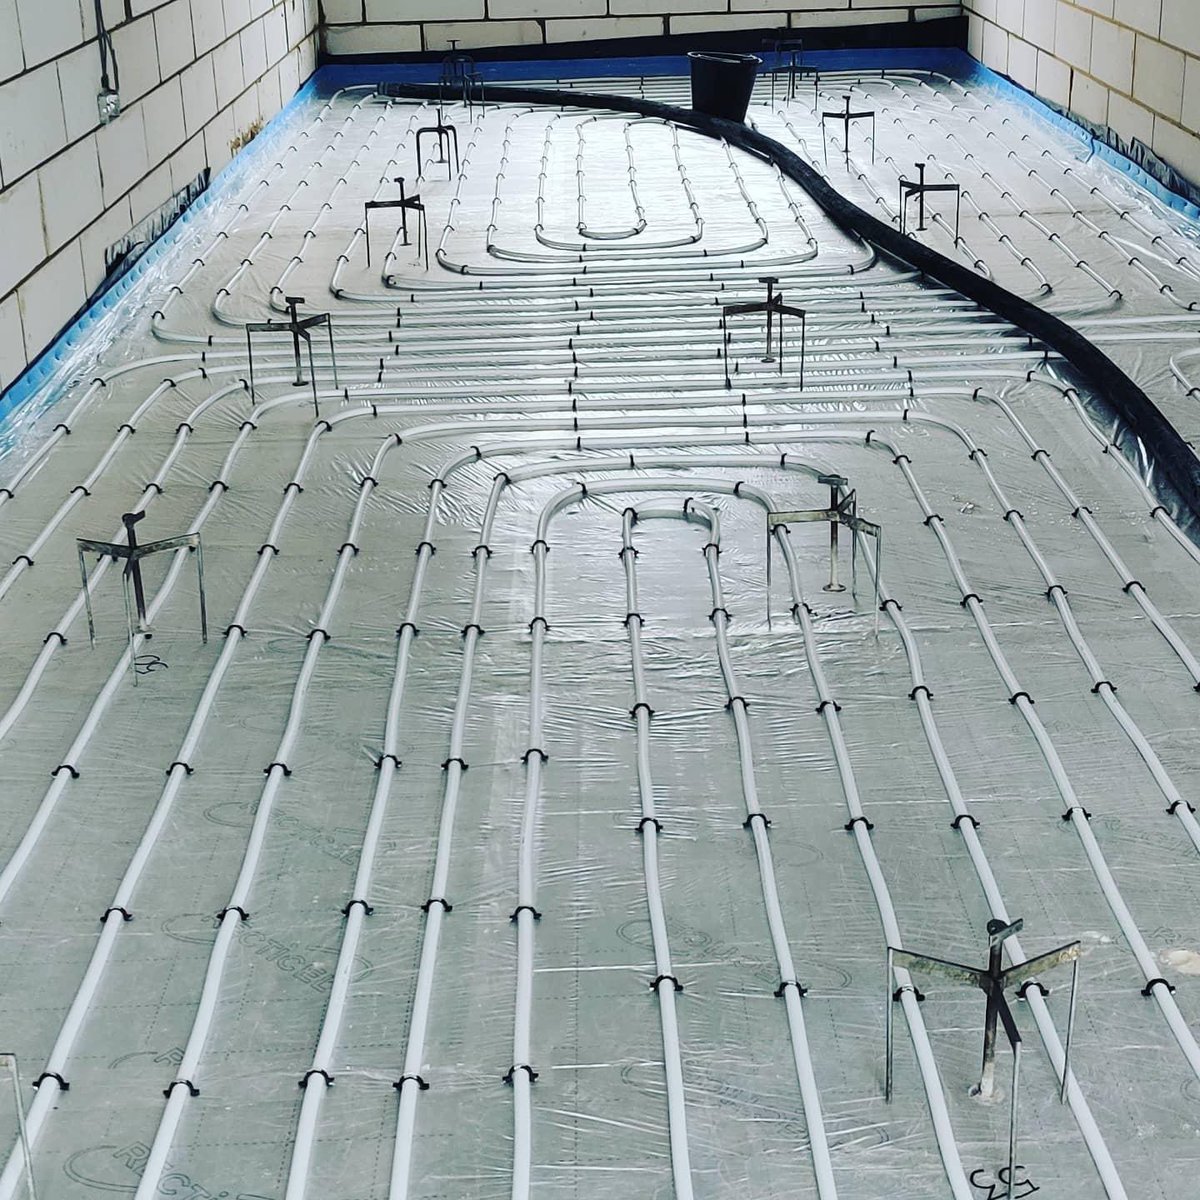 Get a quick quote from #flowscreed 

estimating@flow-screed.com

#underfloorheating #screeding #concrete #flowingliquidscreed #liquidscreed #floorscreed #flowscreed #warmfloors